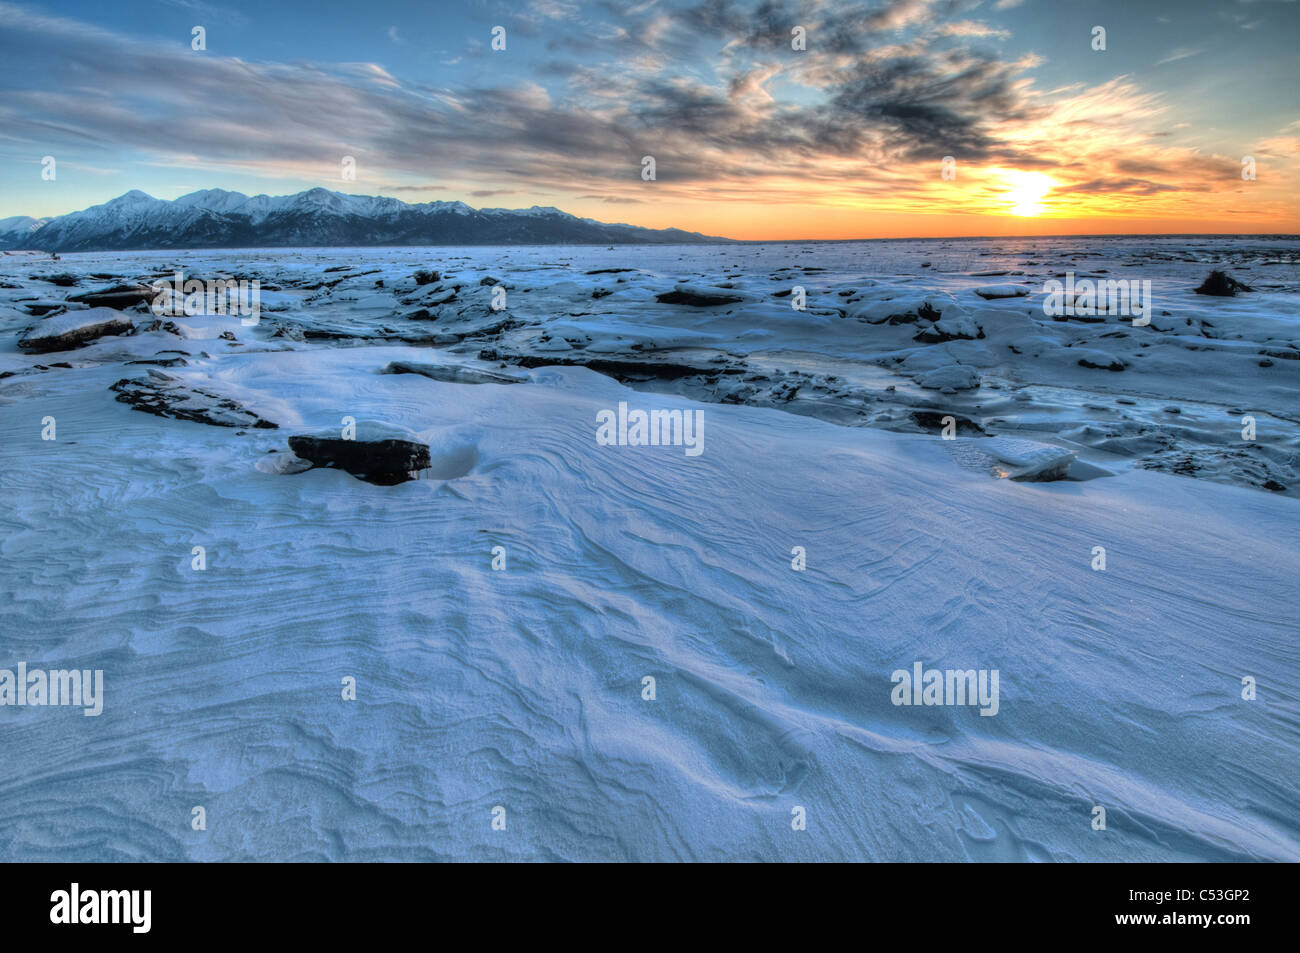 Sunset over windblown snow and ice, Anchorage Coastal Wildlife Refuge, Soutcentral Alaska, Winter, HDR Stock Photo